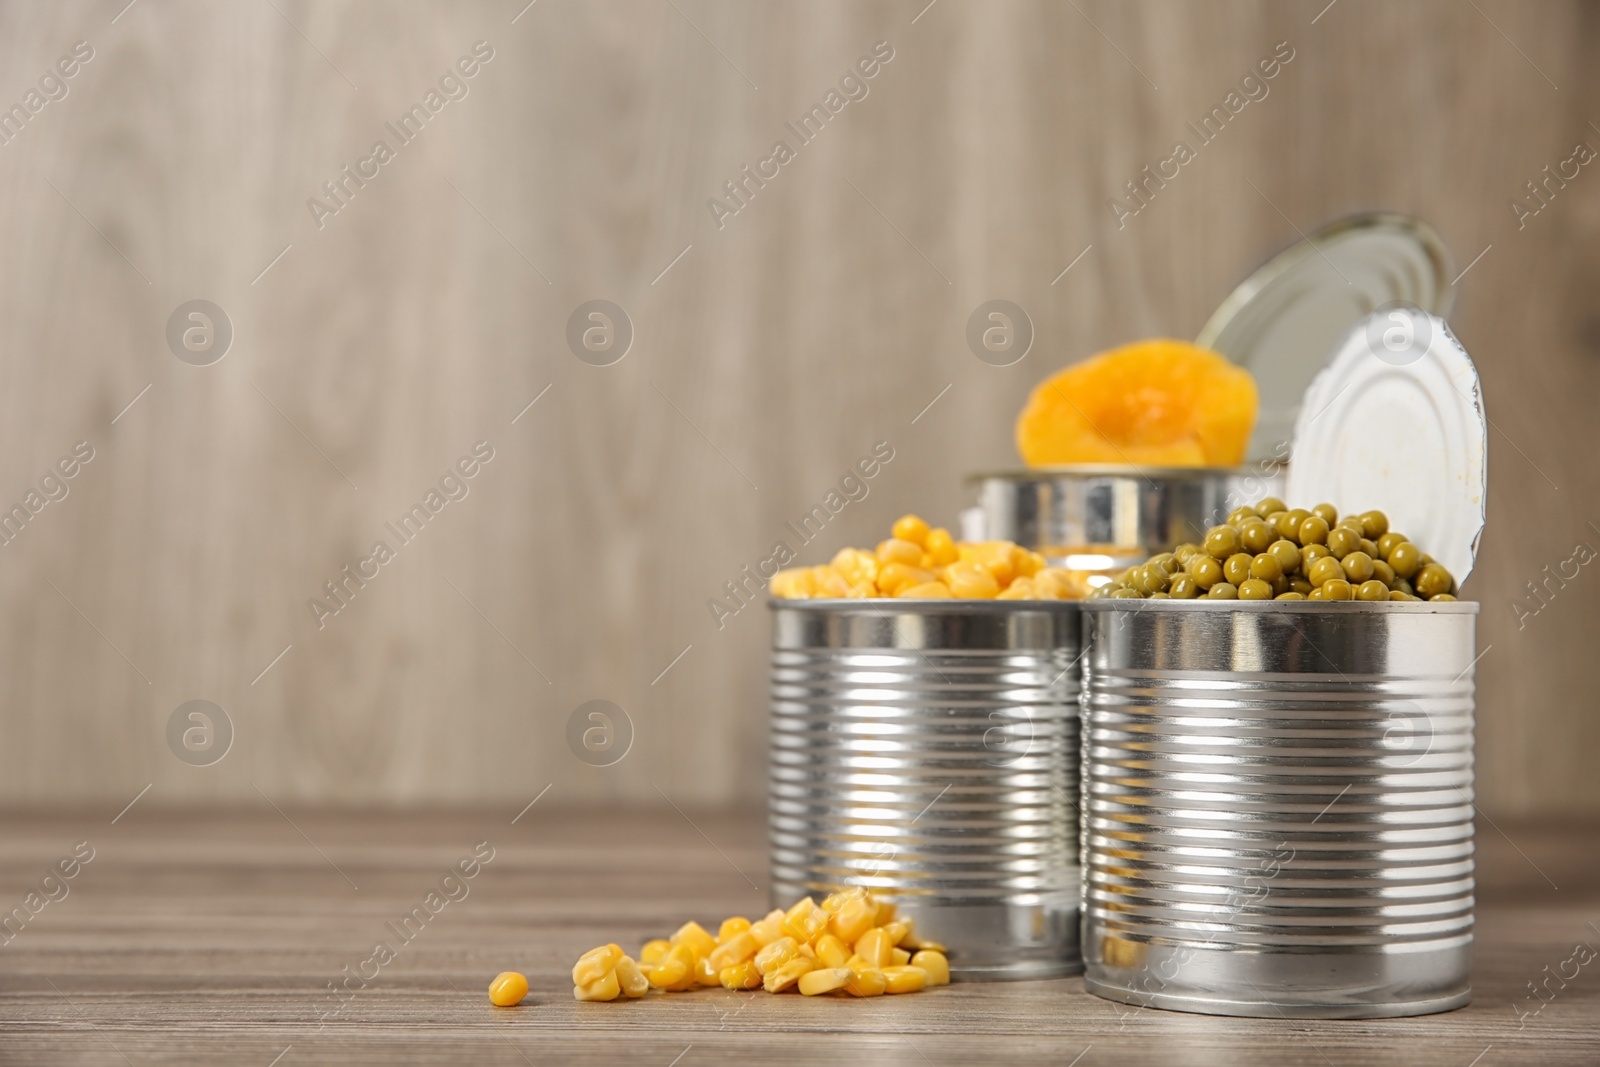 Photo of Open tin cans with conserved vegetables and fruits on wooden table. Space for text